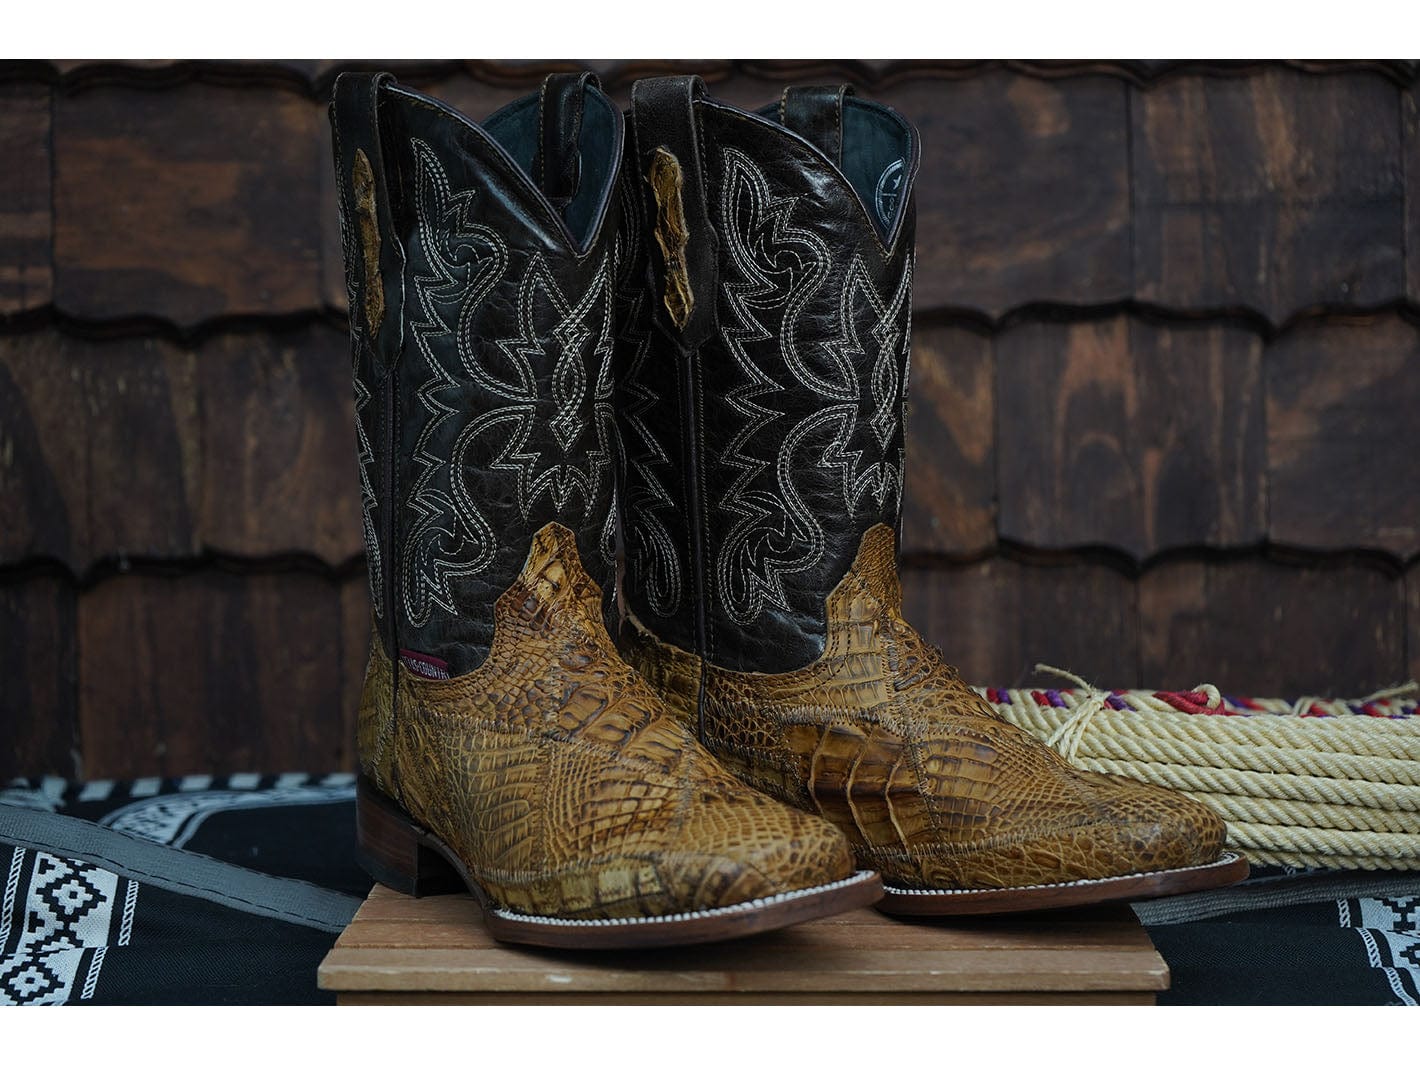 TENT SALE! Texas Country Western Boot Caiman Rombos Orix, Cognac, & Shedron Square Toe